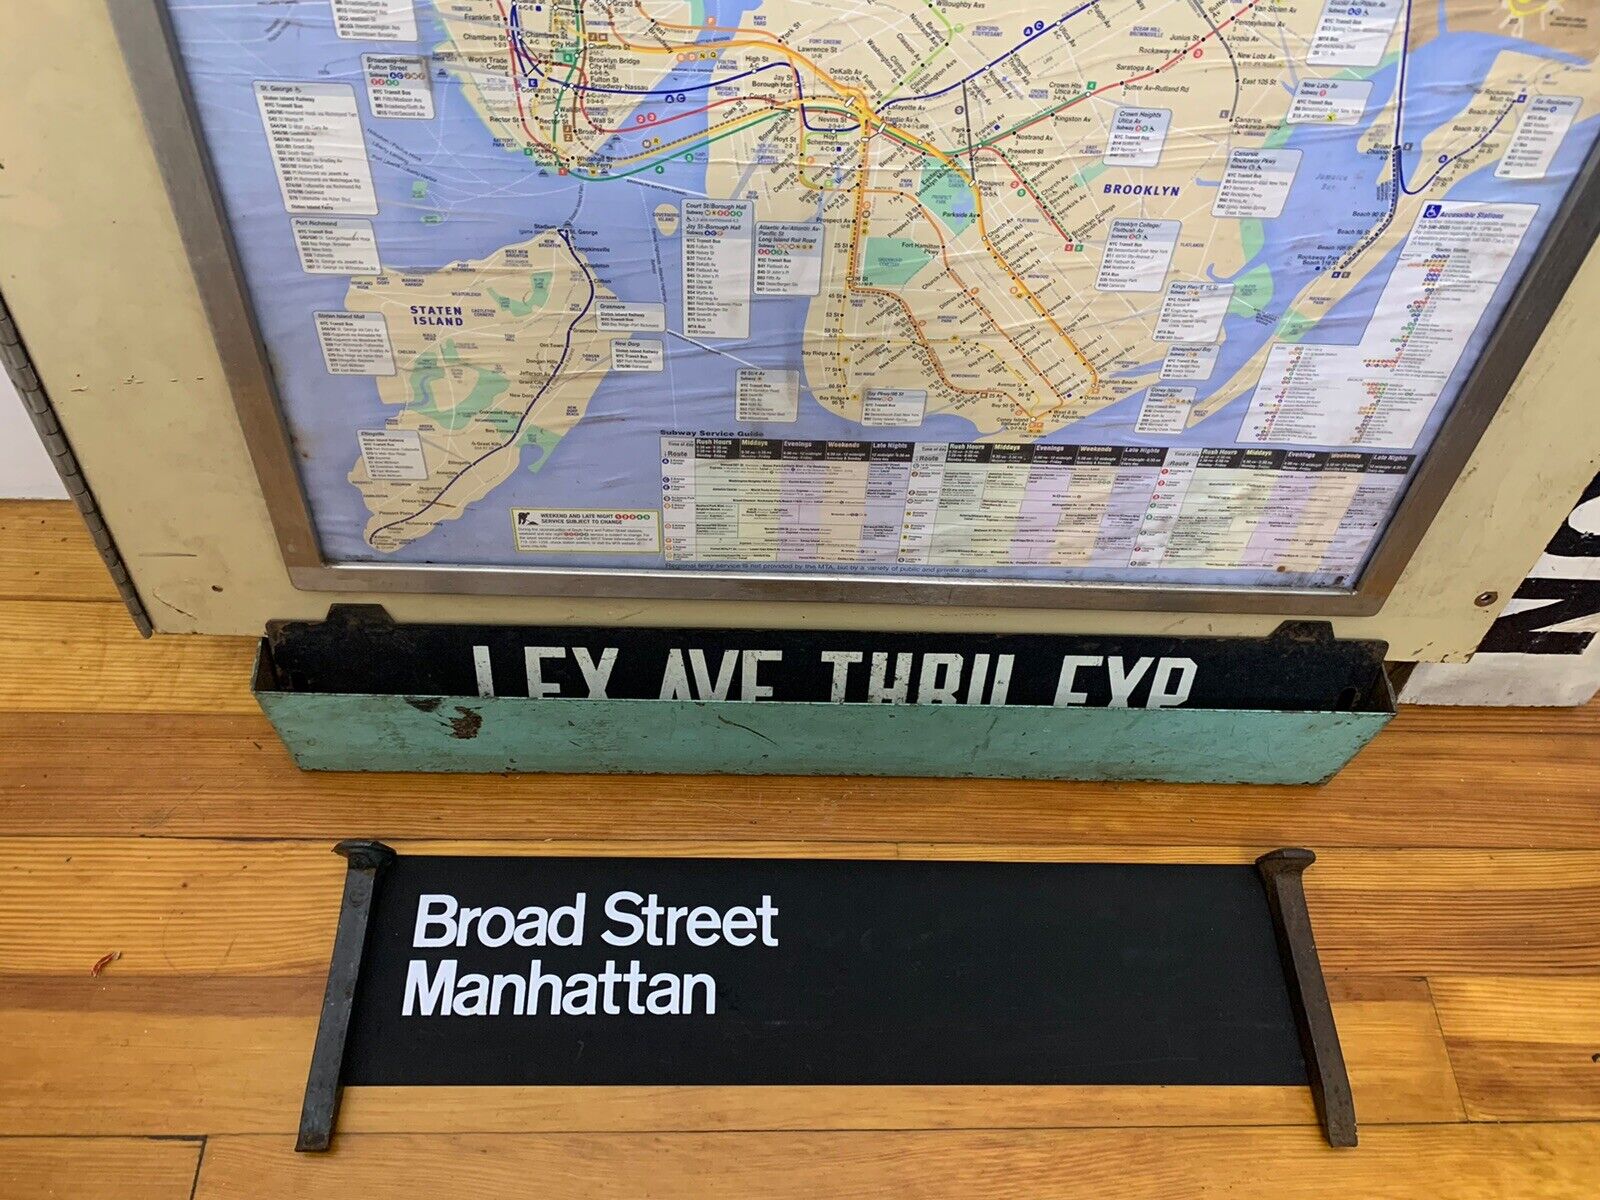 NYC SUBWAY SMALL FONT ROLL SIGN BROAD STREET MANHATTAN NEW YORK STOCK EXCHANGE